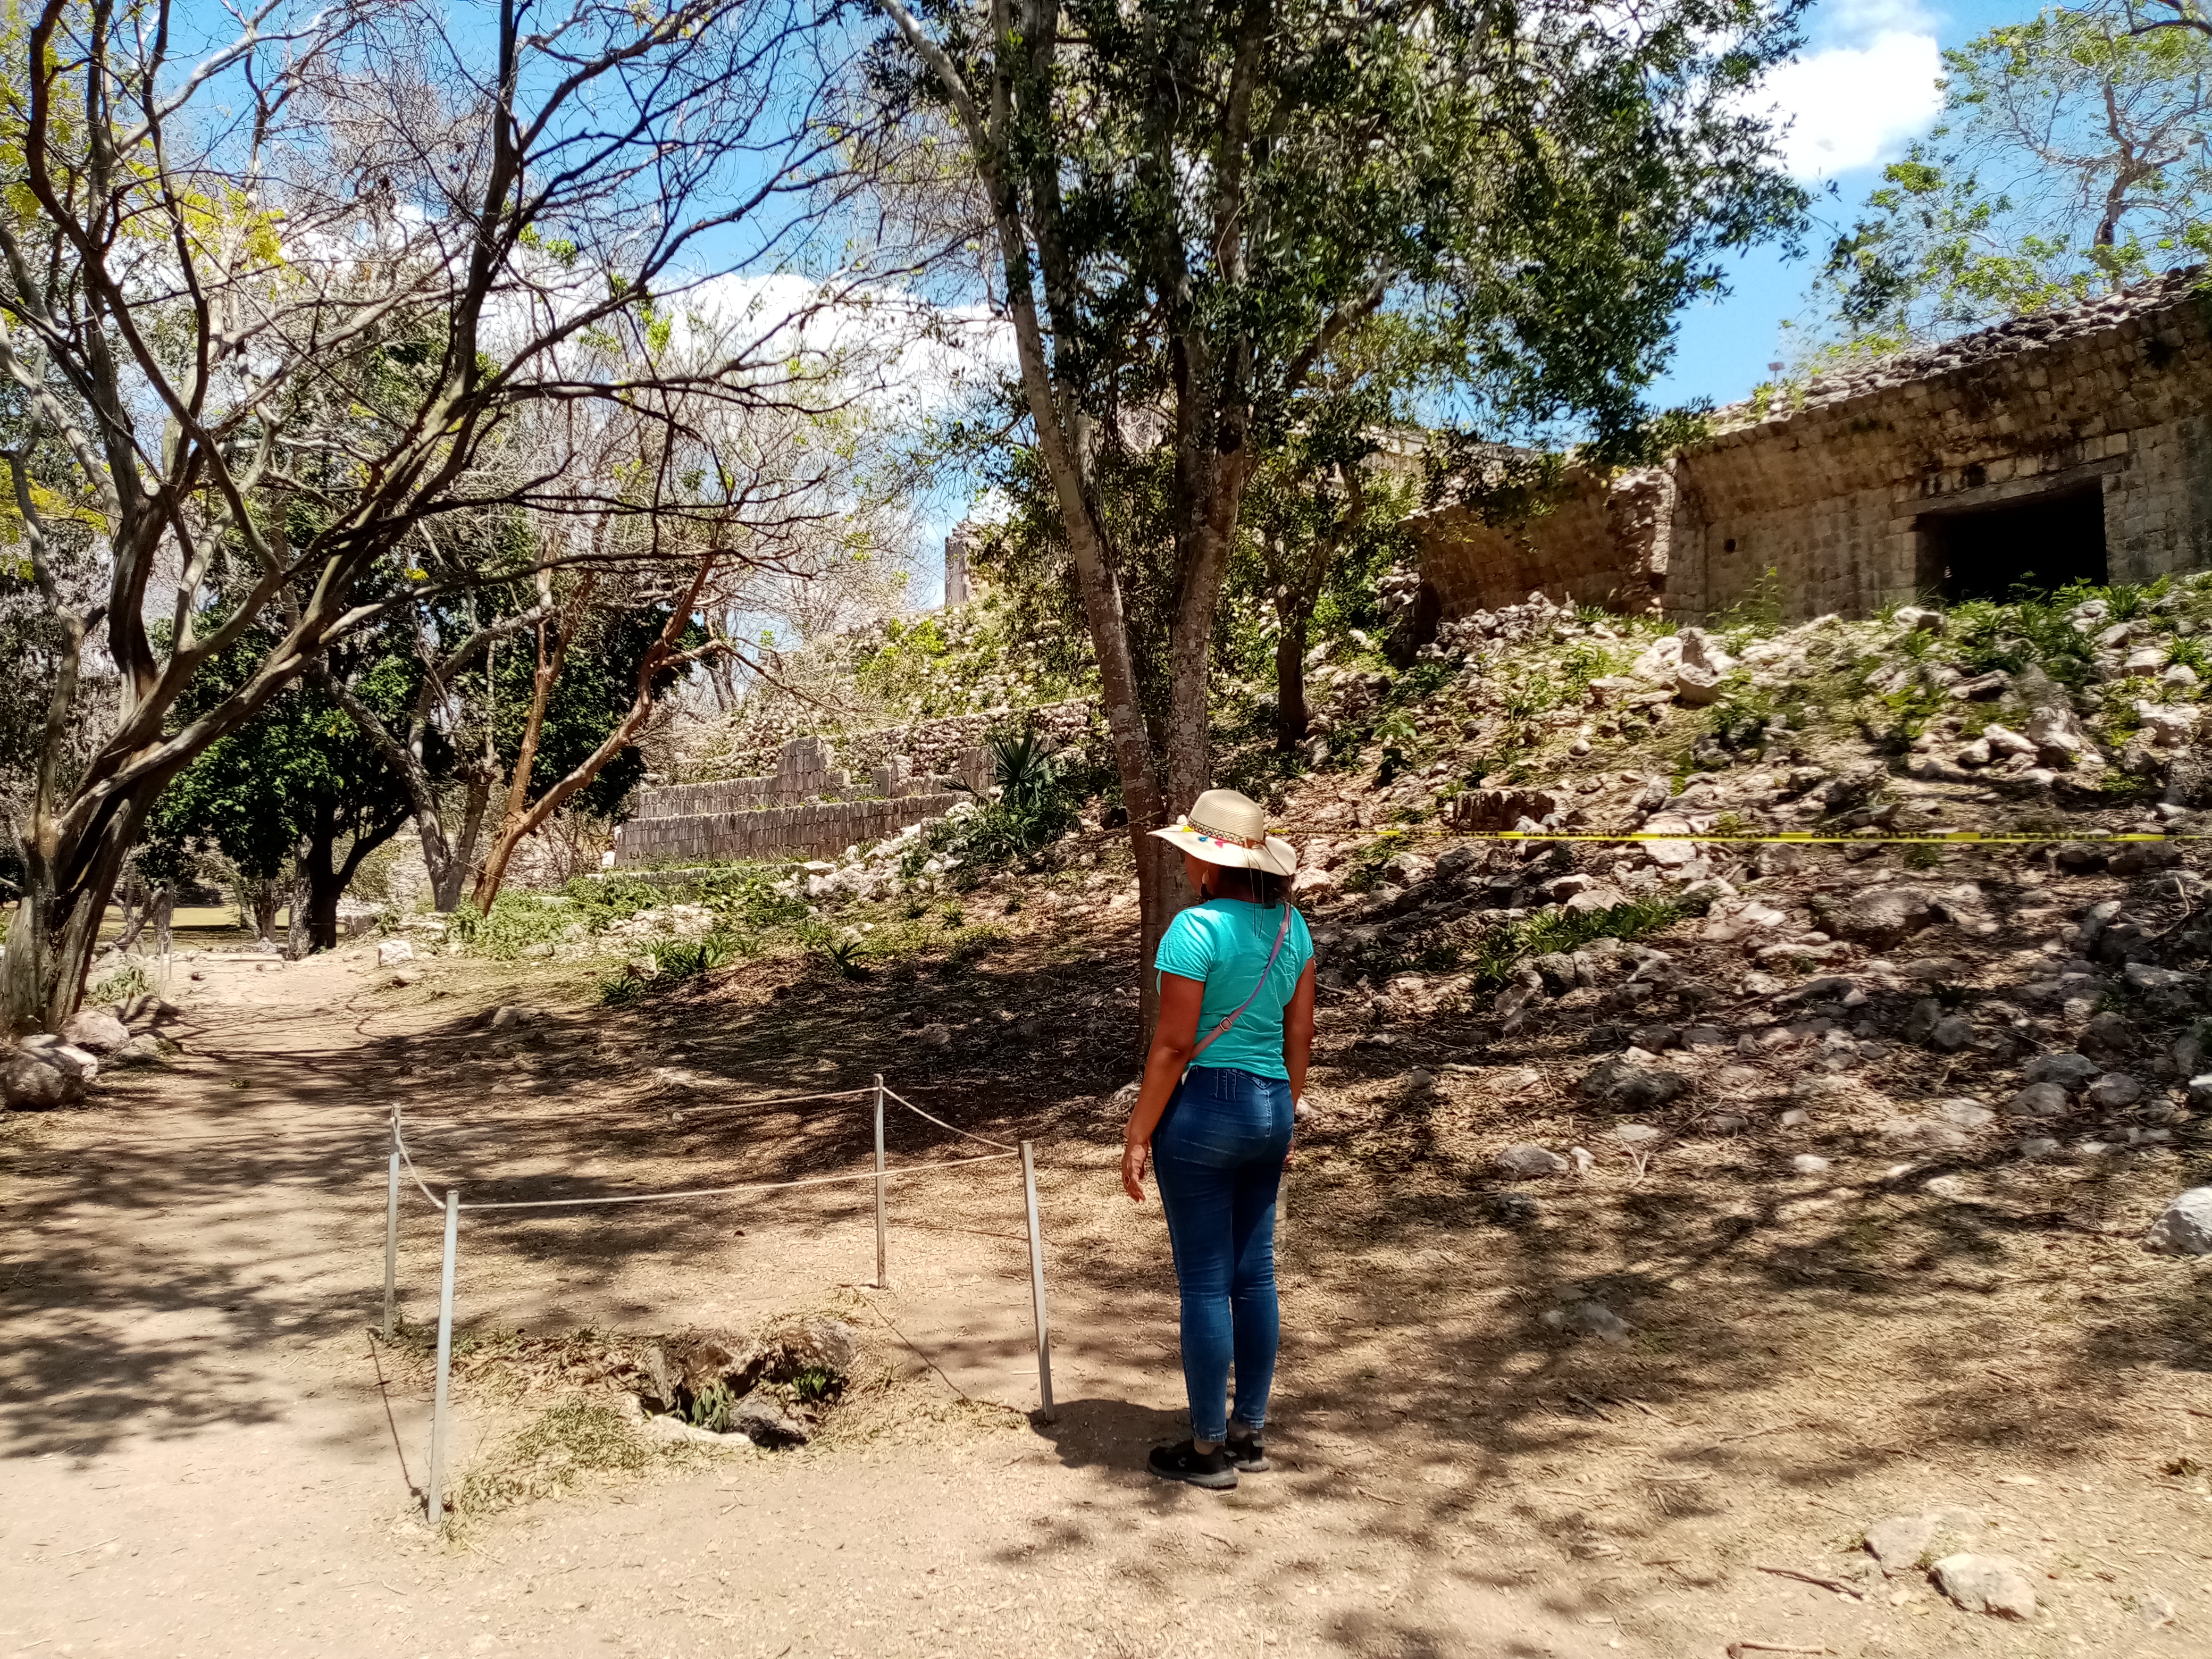 Woman standing in dry, wooded area in rural Mexico